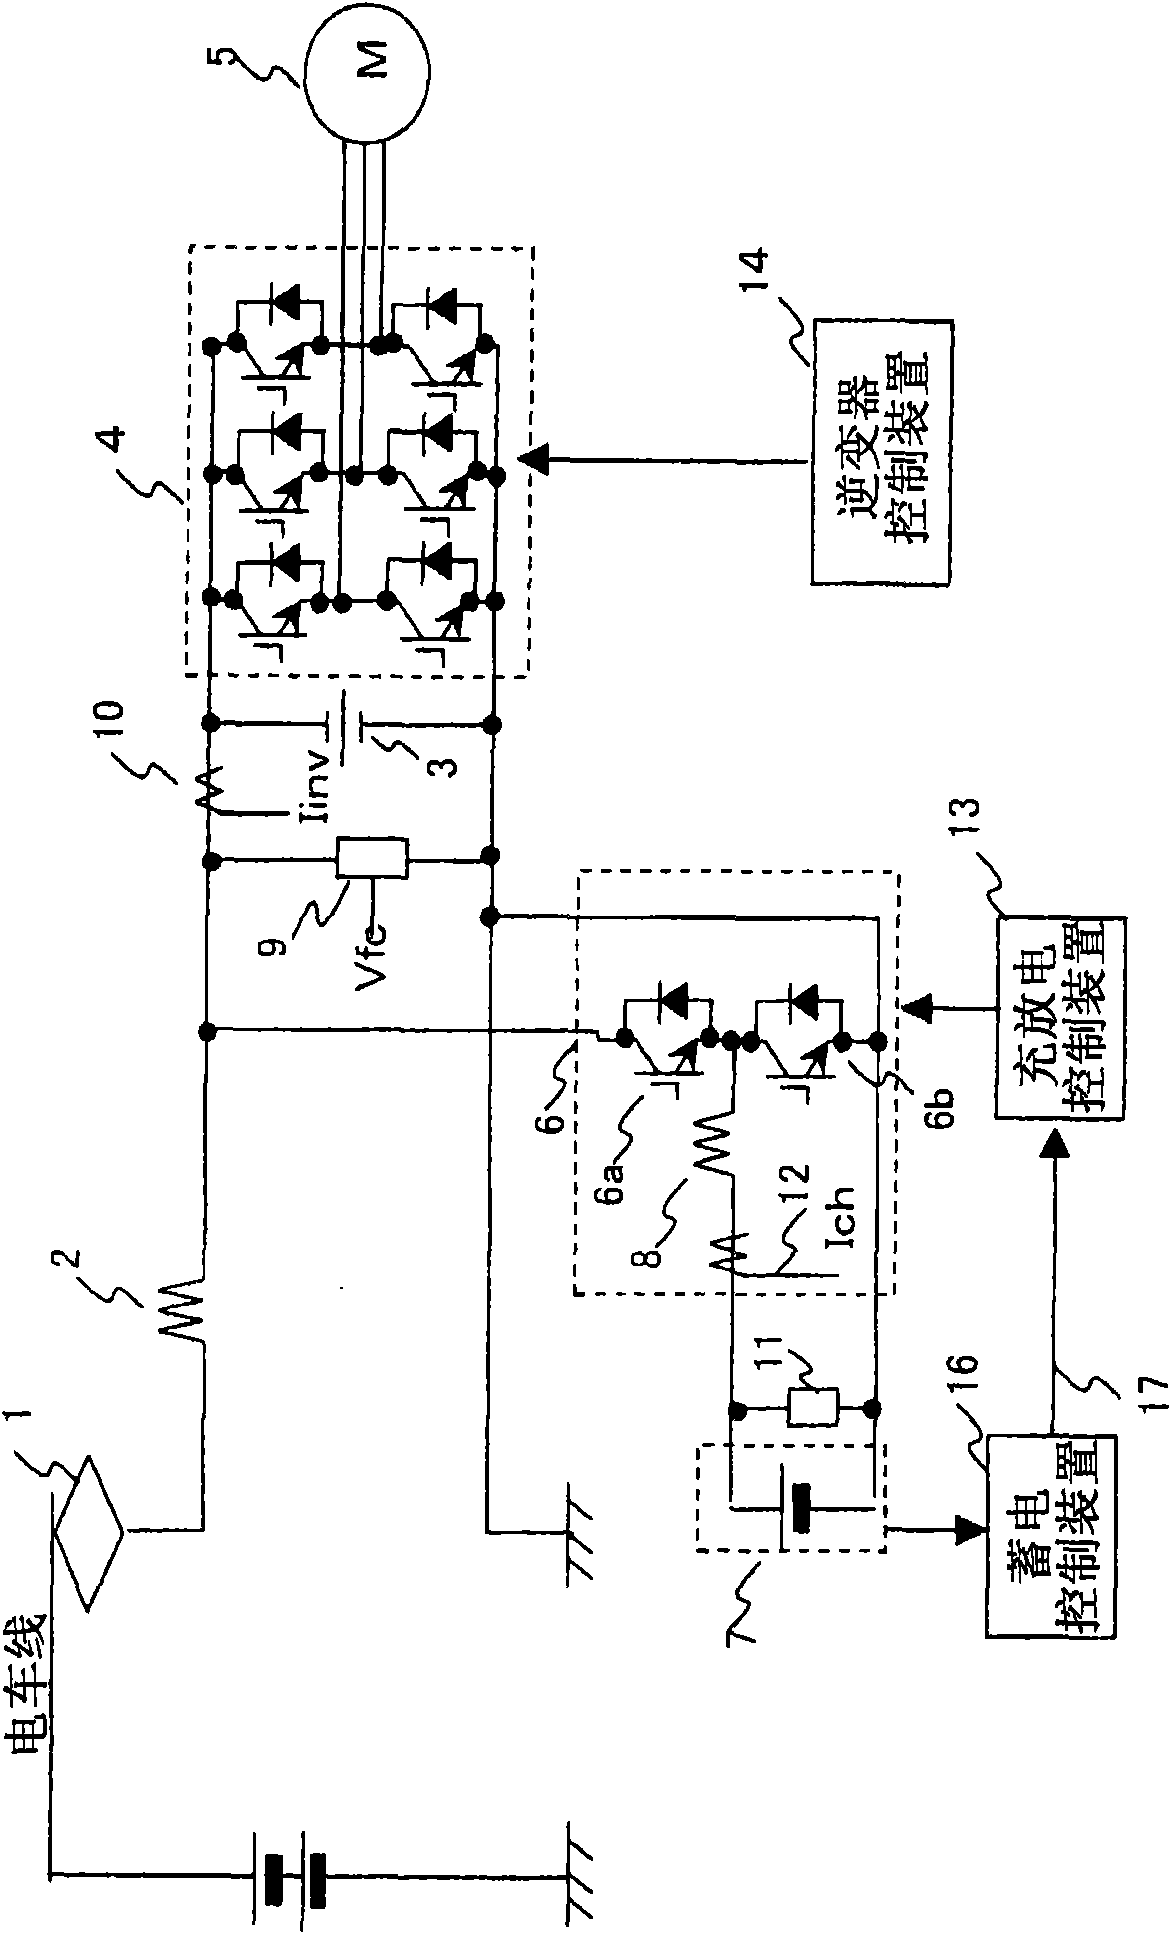 Control system for vehicle receiving power intermittently